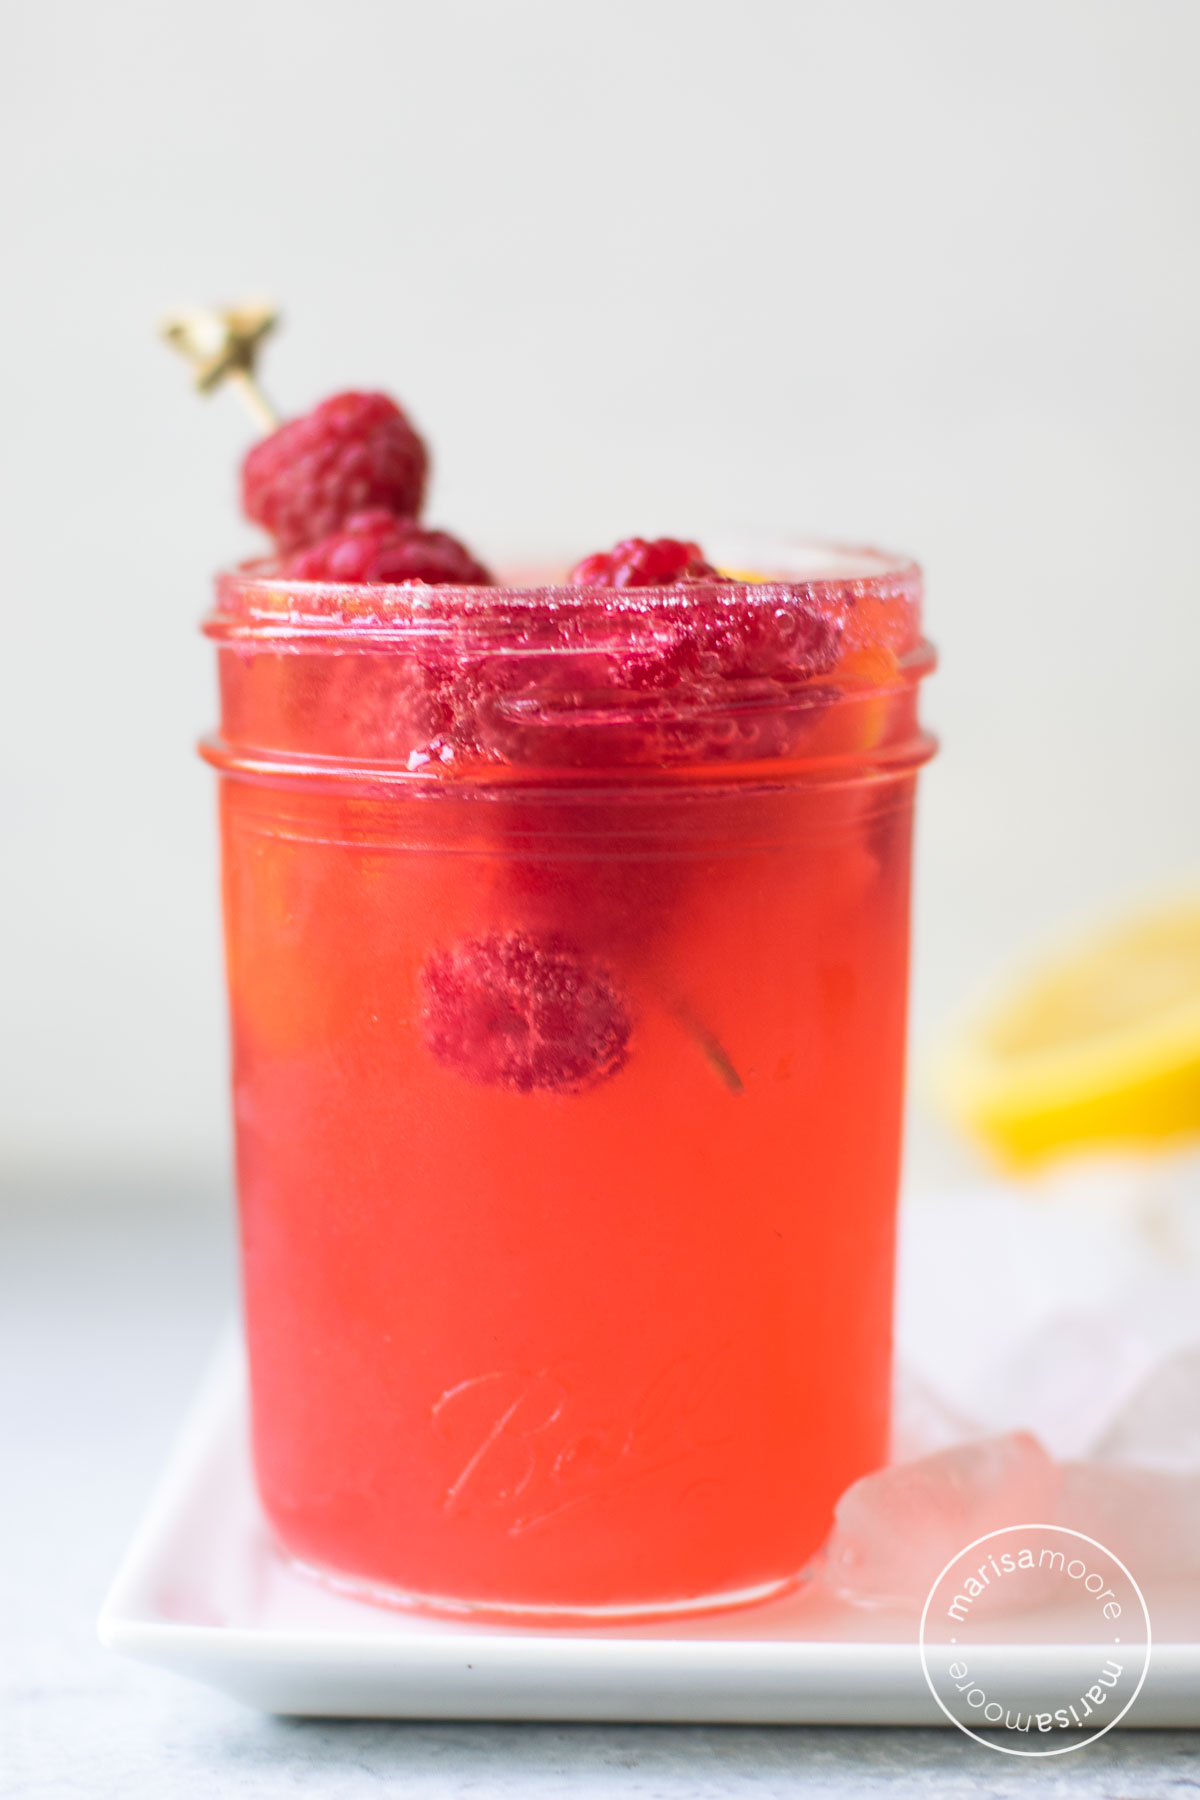 Close up of an 8 ounce jar containing the cocktail with fresh raspberry garnish